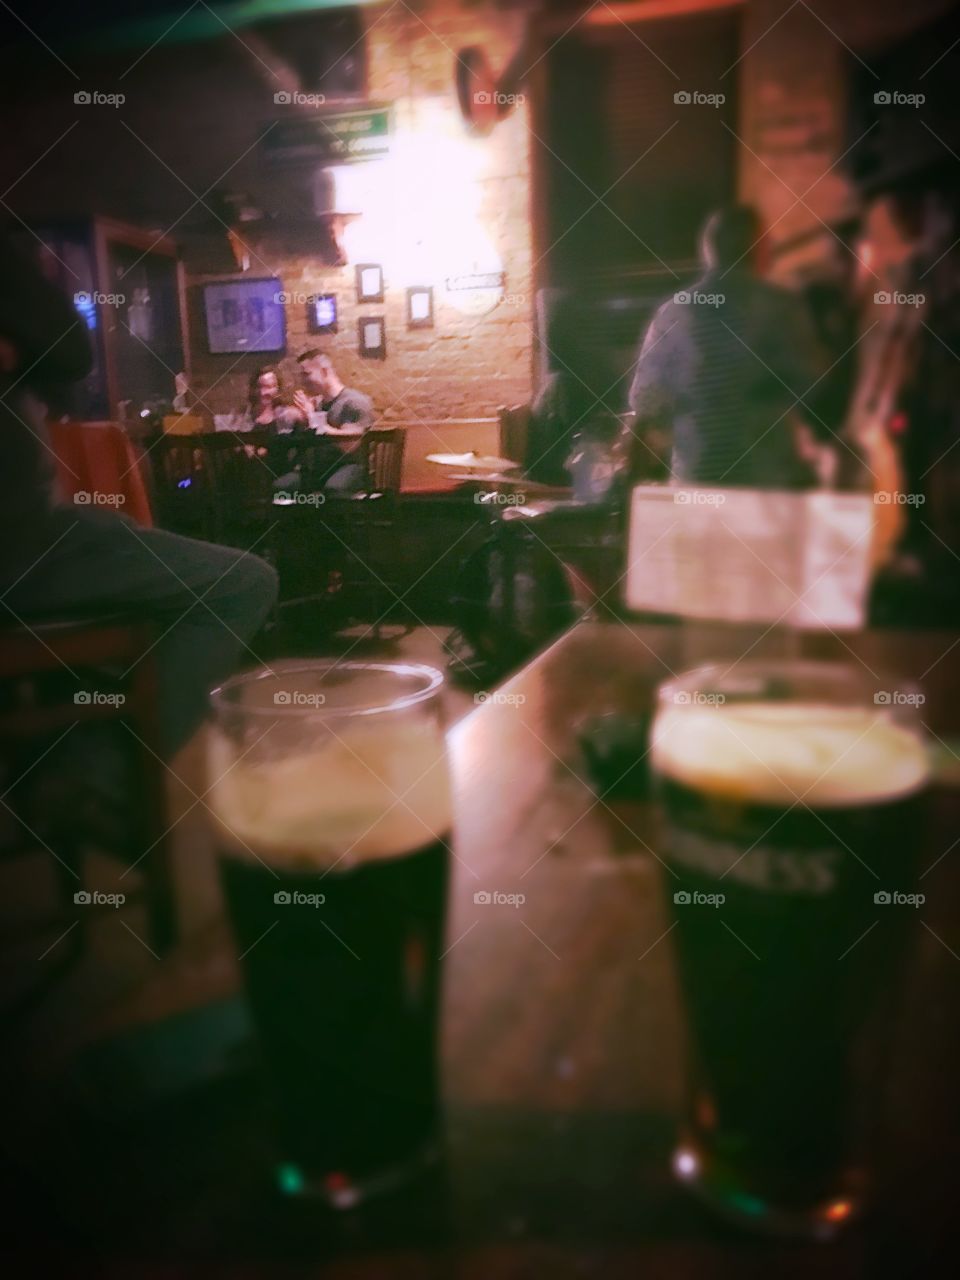 Guinness and people watching